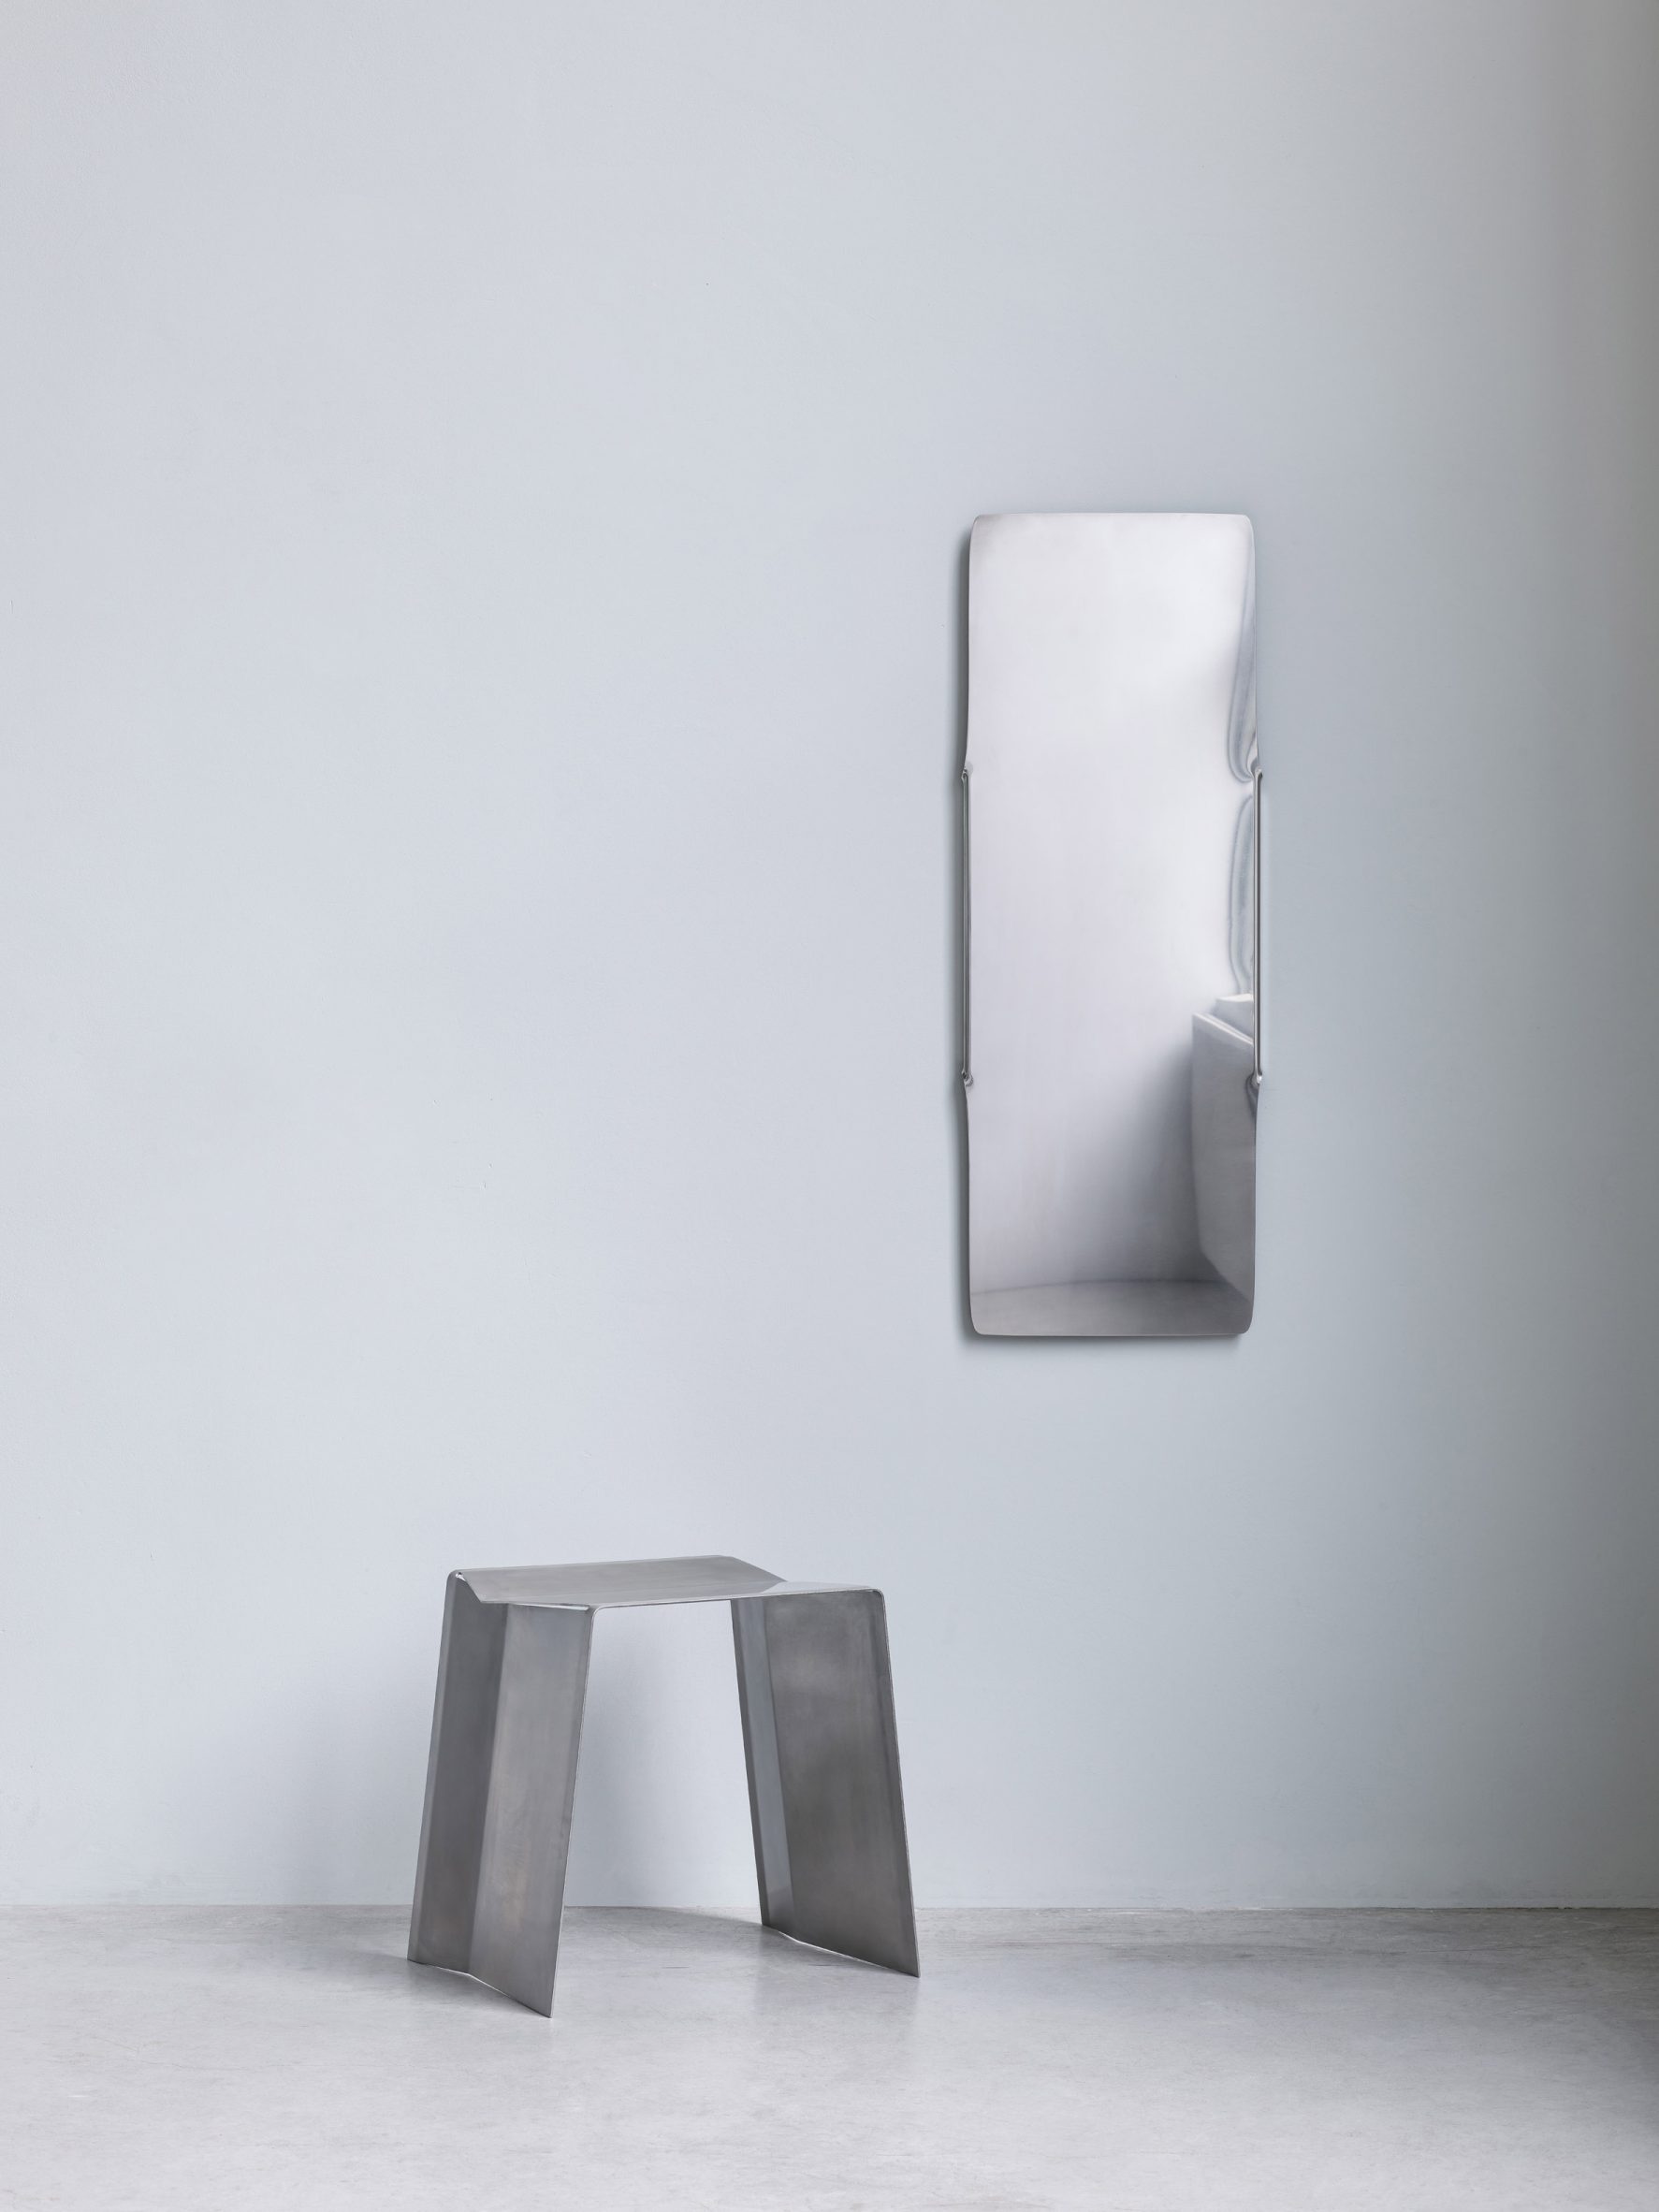 Camber stool and SST mirror by Paul Coenen at DDW